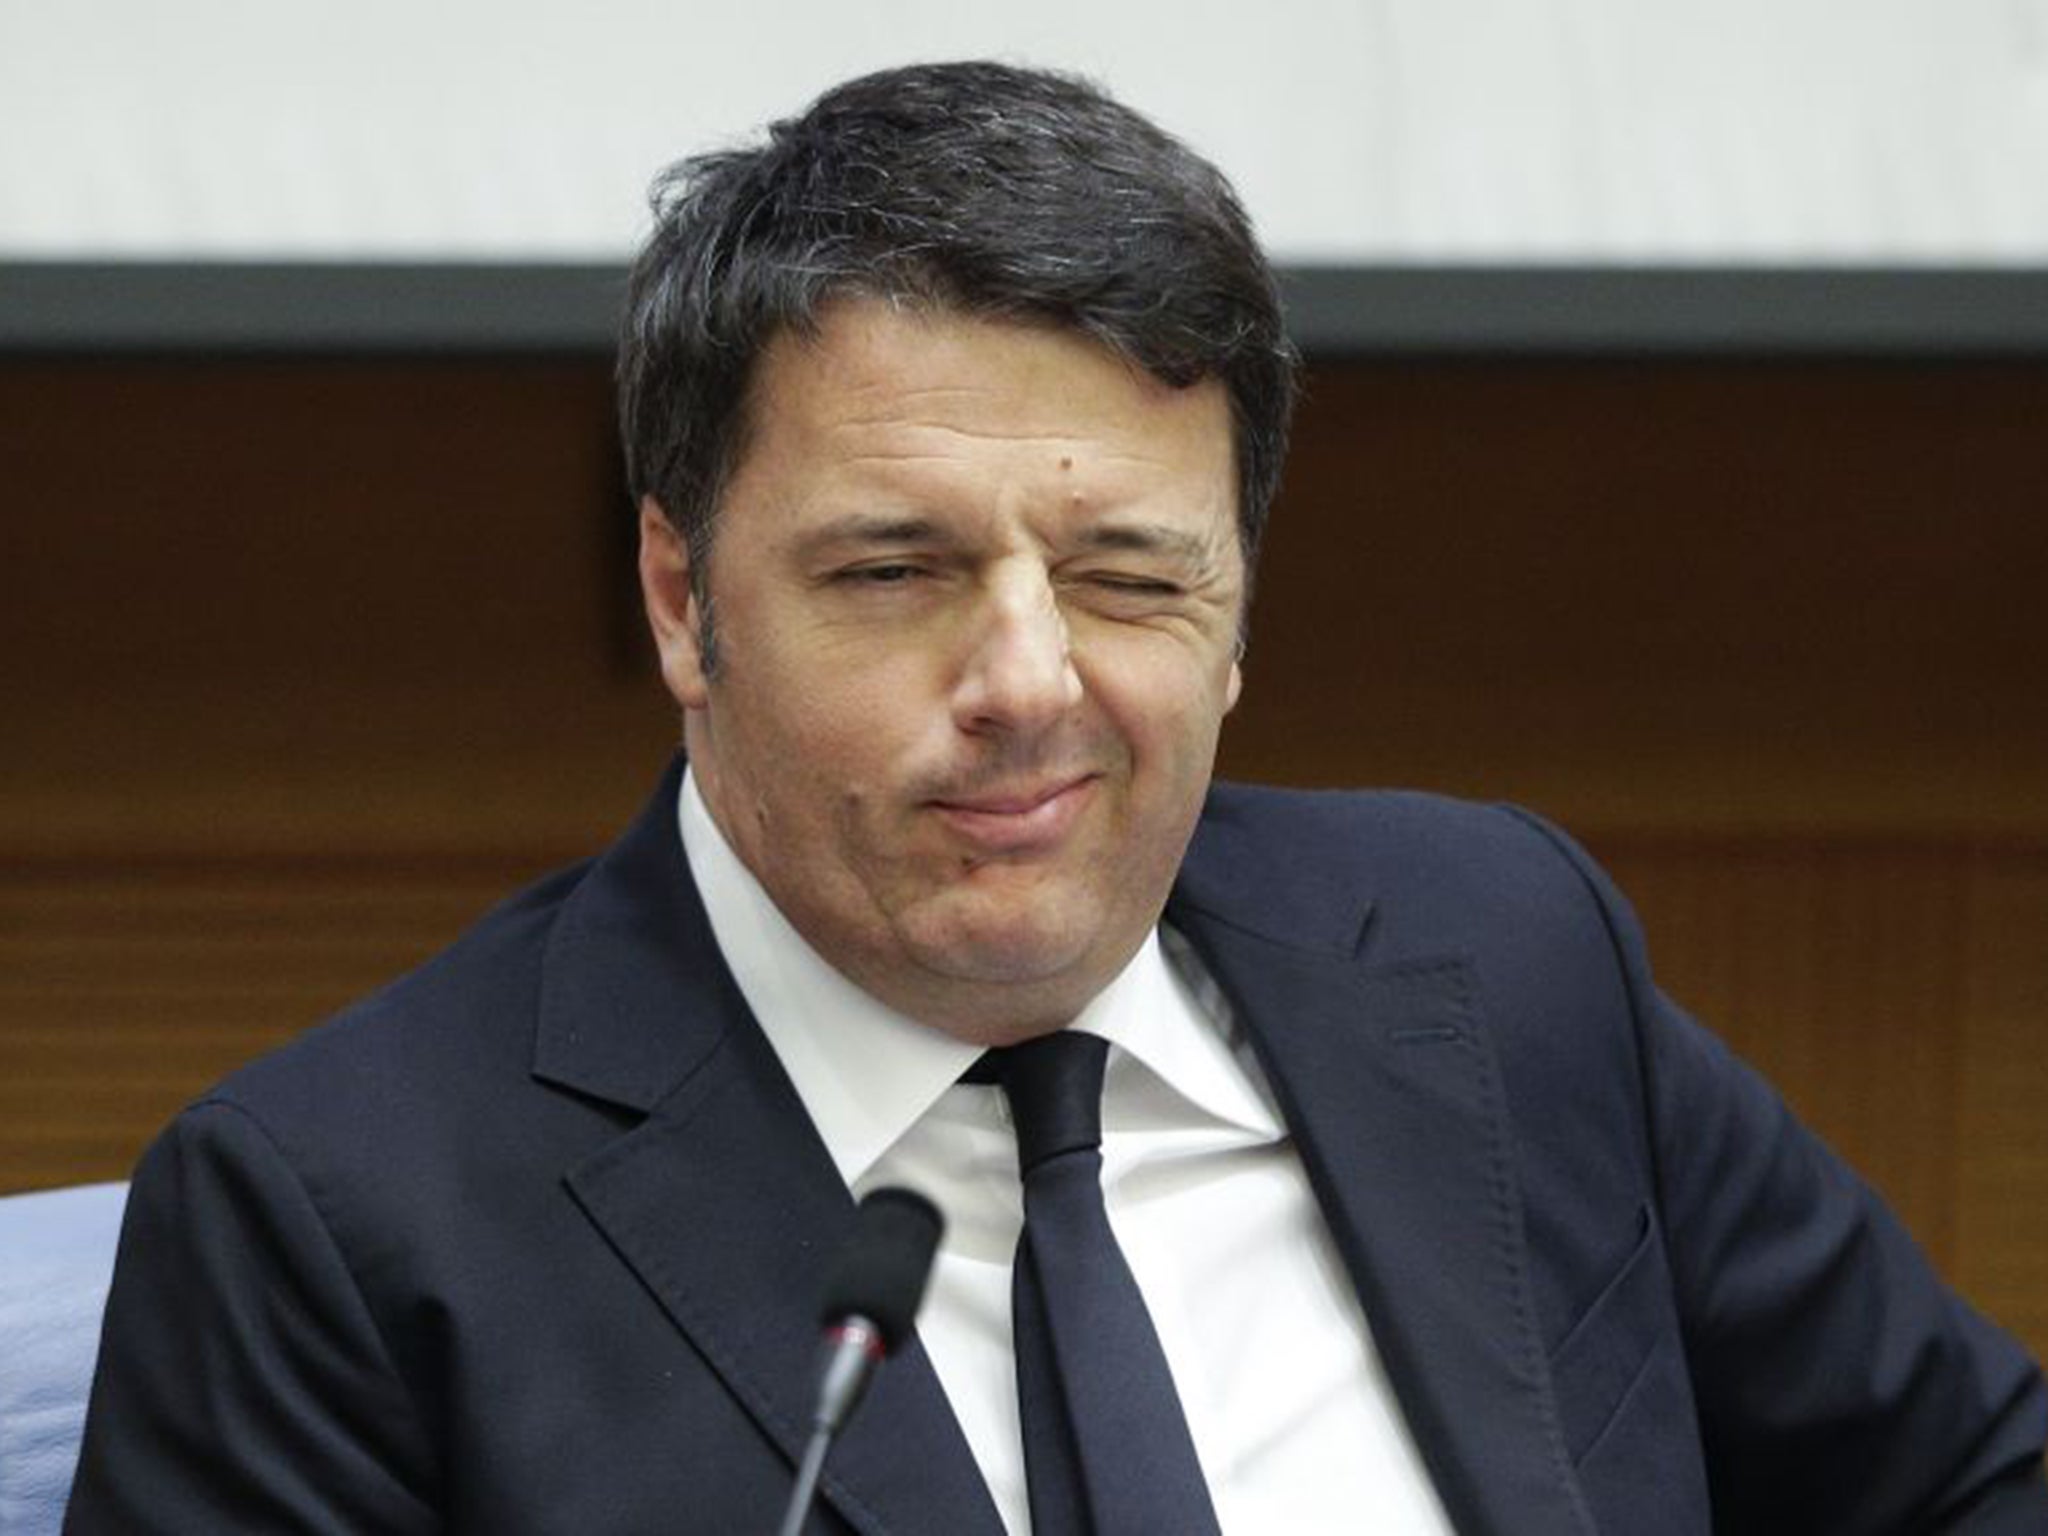 The Italian Prime Minister, Matteo Renzi, said he “laughed from start to finish”